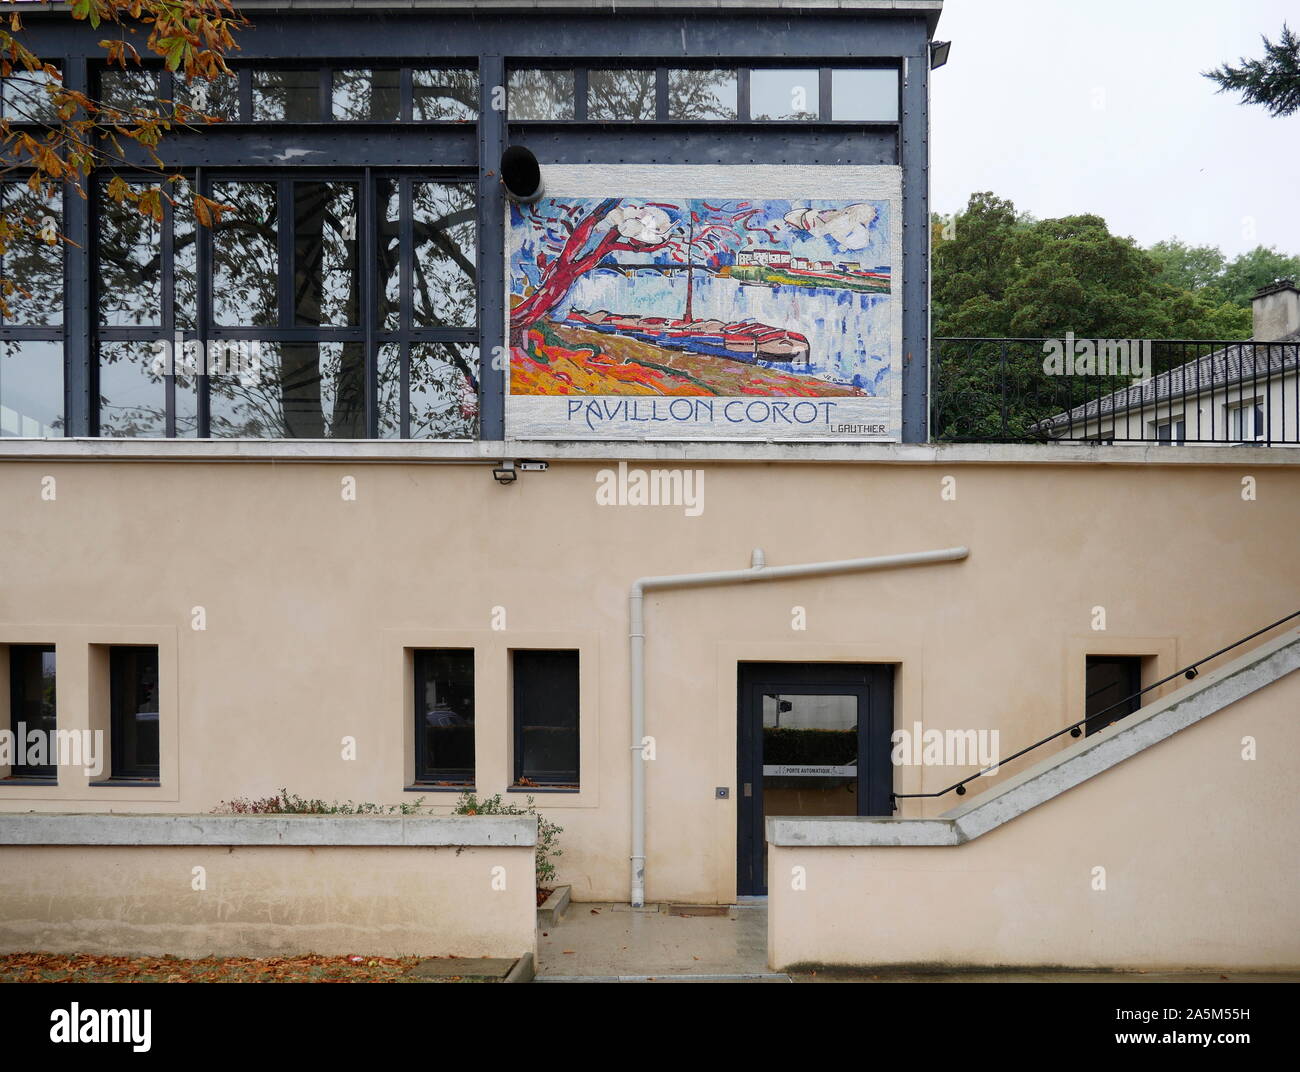 AJAXNETPHOTO. 2019. PORT MARLY, FRANCE. - PAVILLON COROT - CONFERENCE, MEETING AND EXHIBITION ROOM ANNEXE TO THE TOWN HALL AVAILABLE TO RENT. MOSAIC AT TOP OF BUILDING BY L. GAUTHIER ENTITLED PAVILLON COROT BASED ON ART WORK BY THE 19TH CENTURY FAUVIST ARTIST MAURICE DE VLAMINCK - PART OF THE ARTIST SIGNATURE CAN BE SEEN ON THE MOSAIC BOTTOM RIGHT OF THE IMAGE.PHOTO:JONATHAN EASTLAND/AJAX REF:GX8 192609 574 Stock Photo